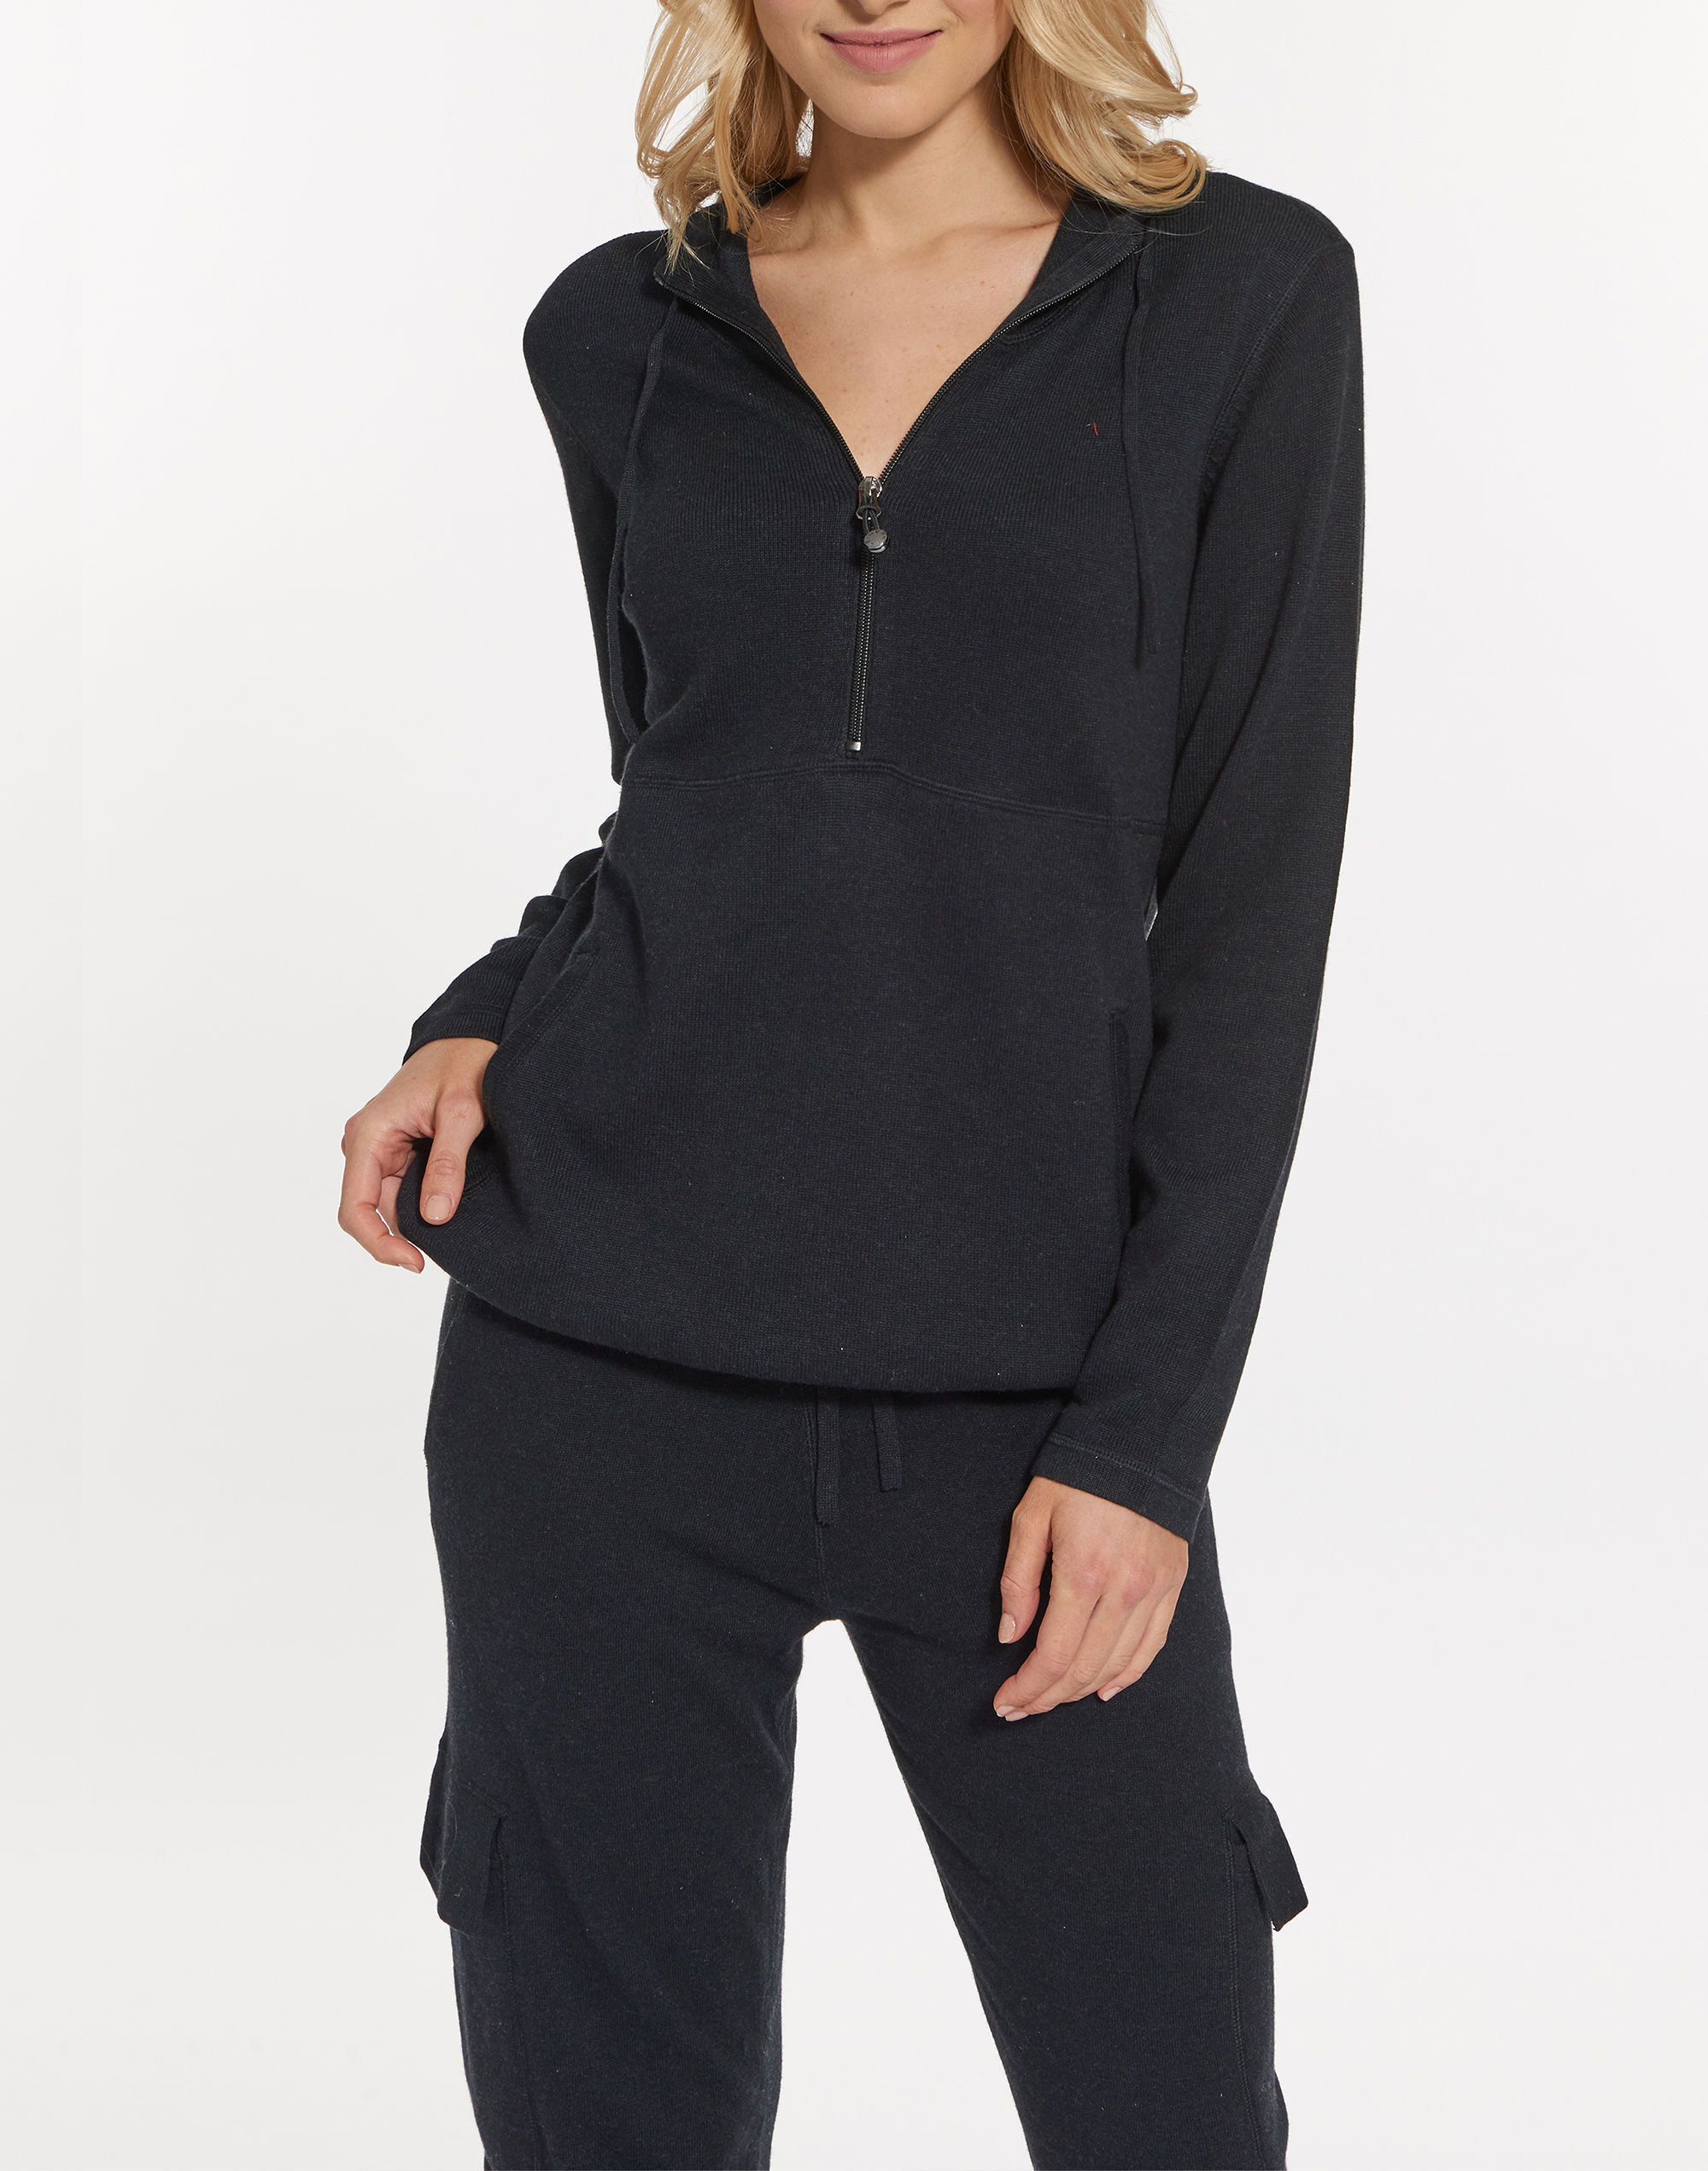 LEIMERE Bowery Half Zip Pullover